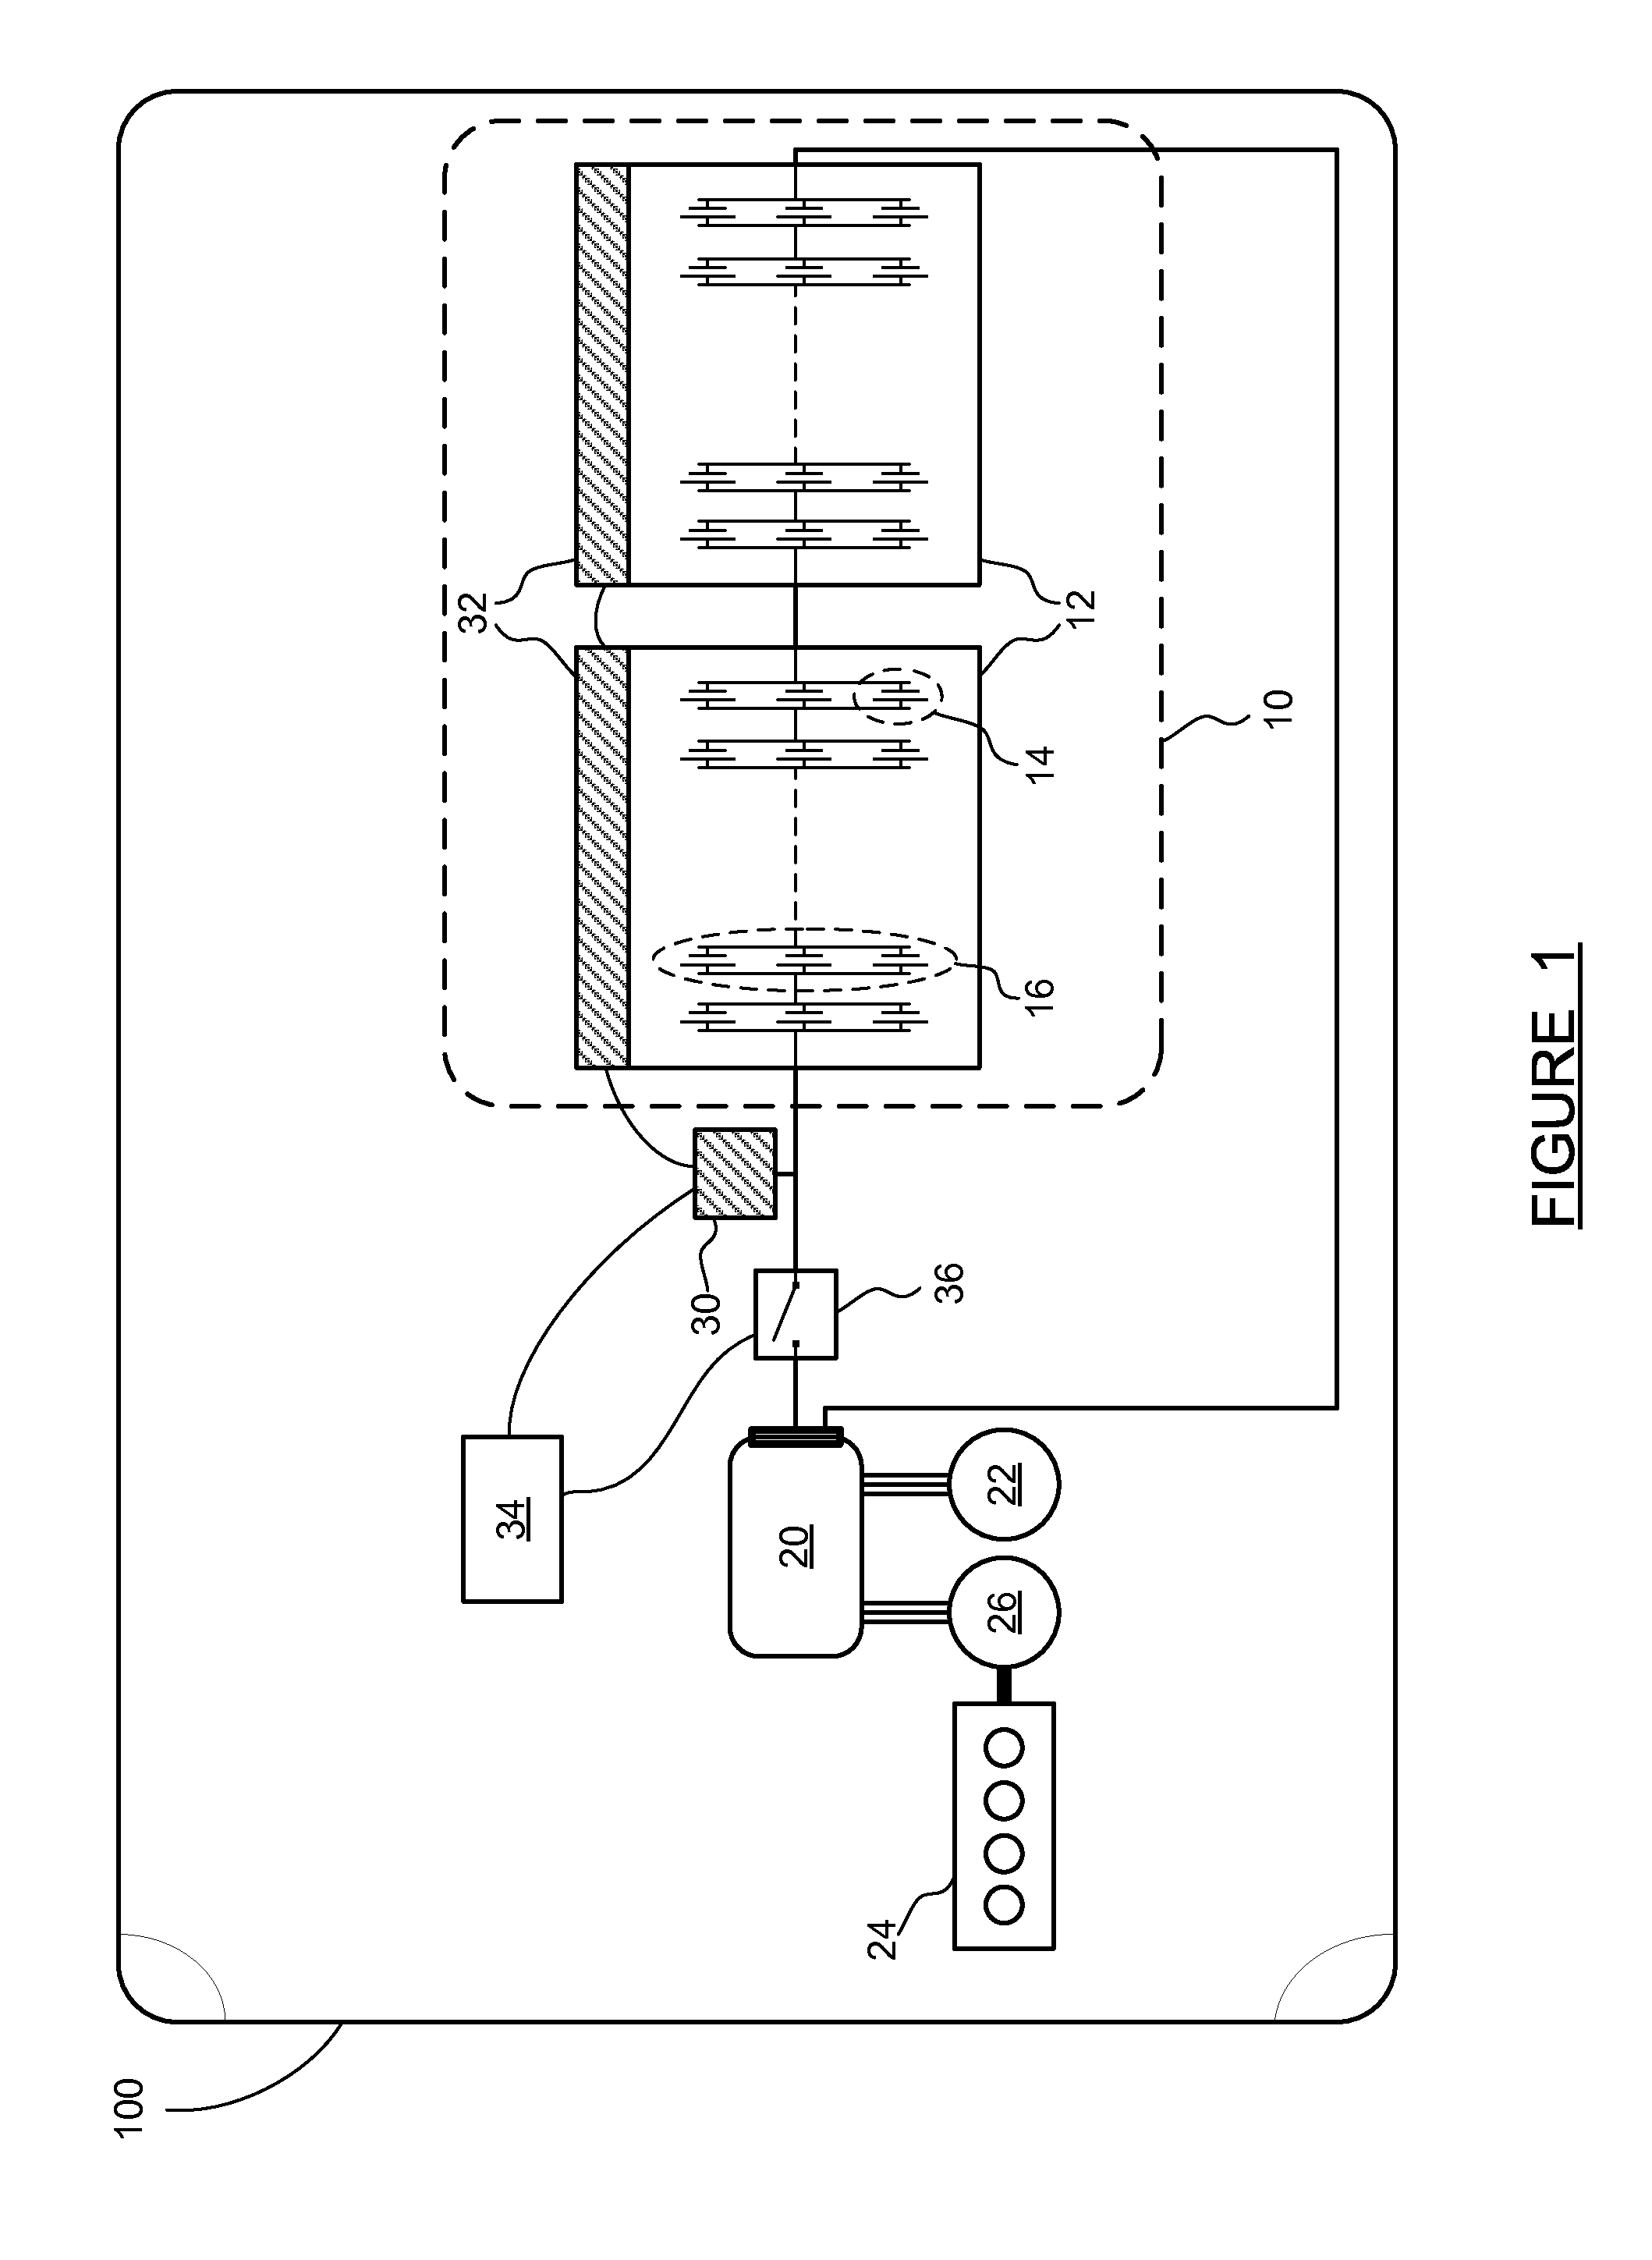 Cell temperature and degradation measurement in lithium ion battery systems using cell voltage and pack current measurement and the relation of cell impedance to temperature based on signal given by the power inverter